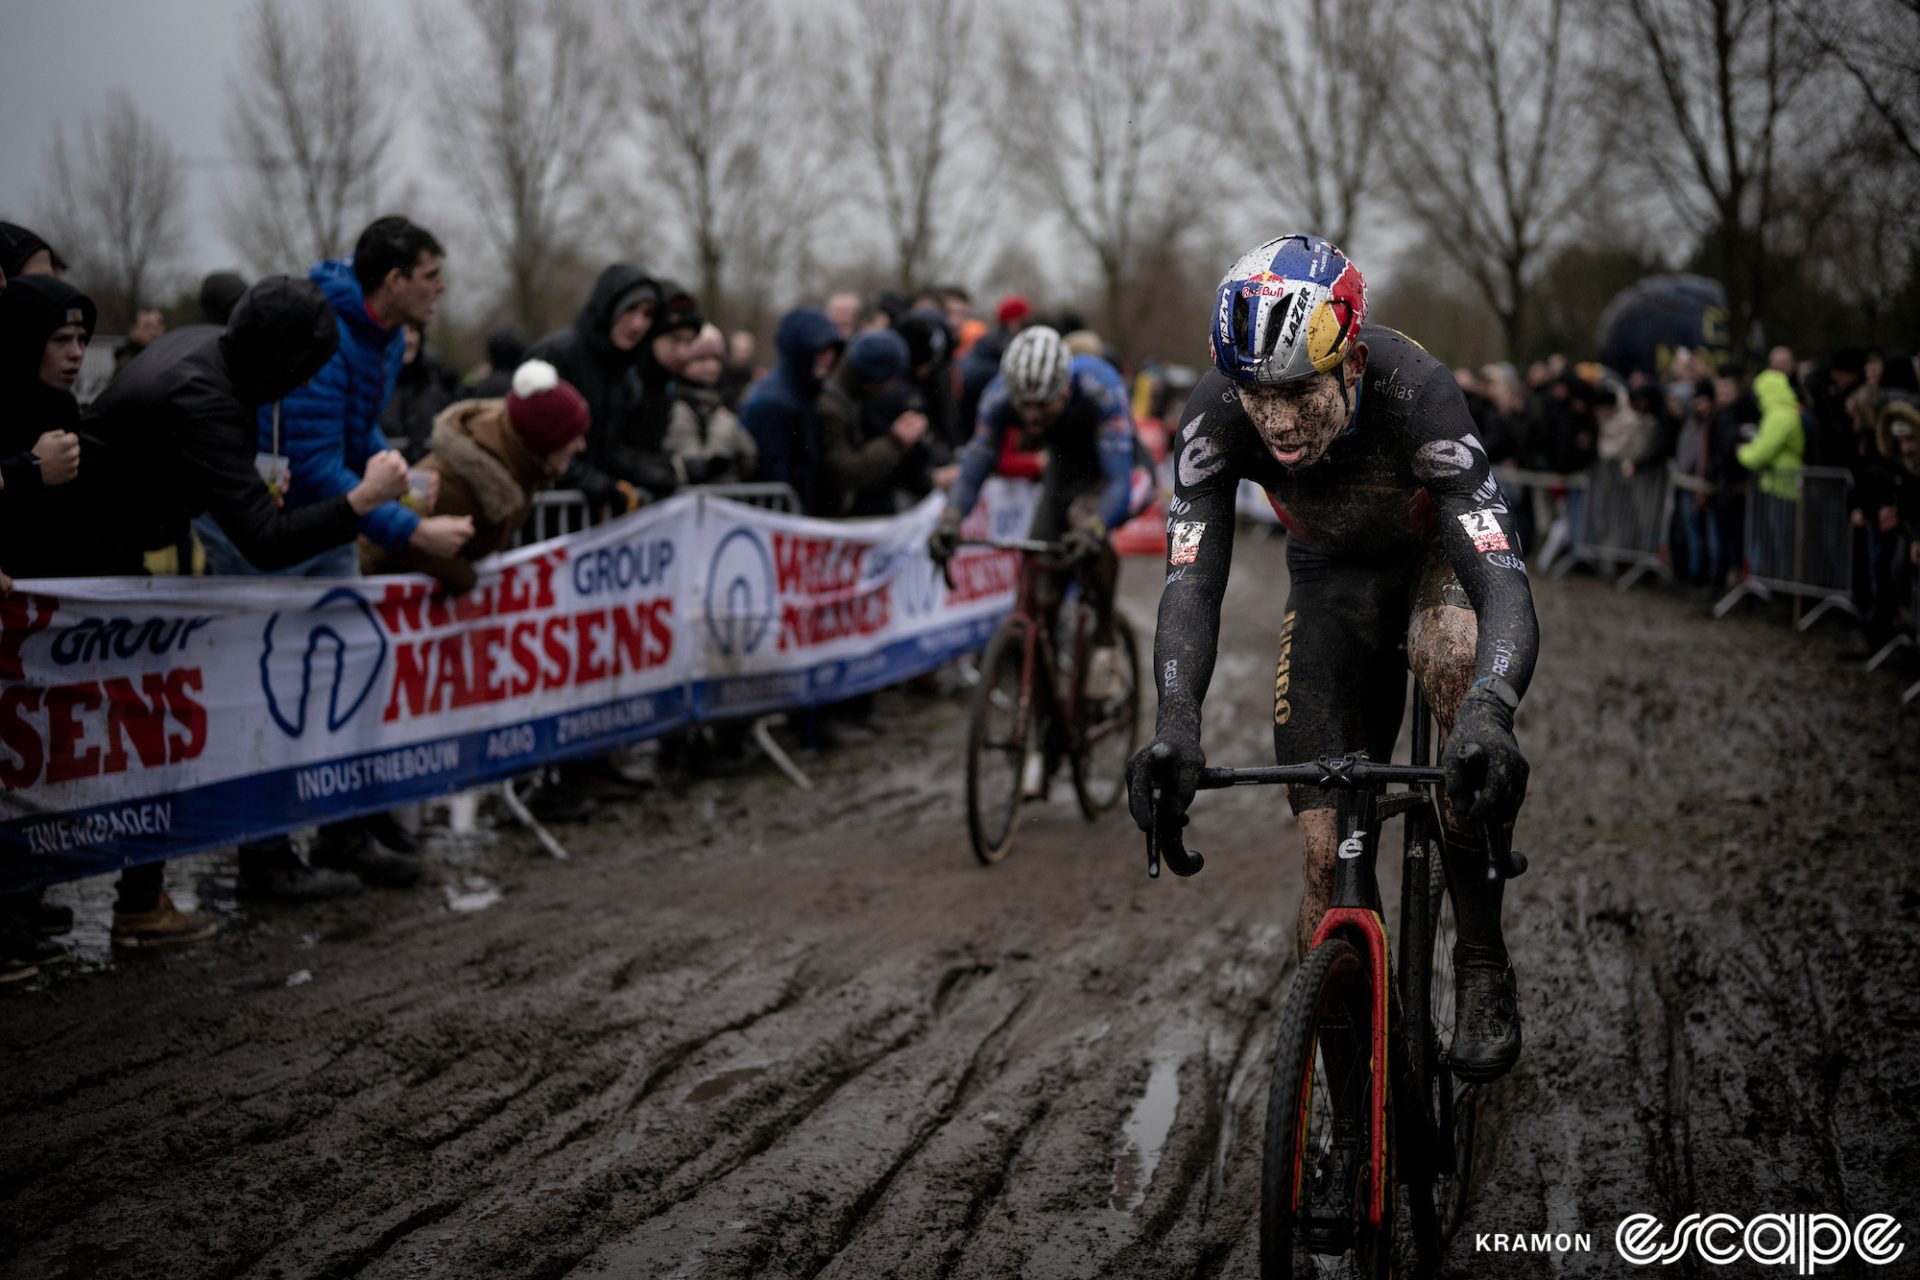 Wout van Aert leads Mathieu van der Poel in a muddy section at the Loenhout CX race in December 2022.